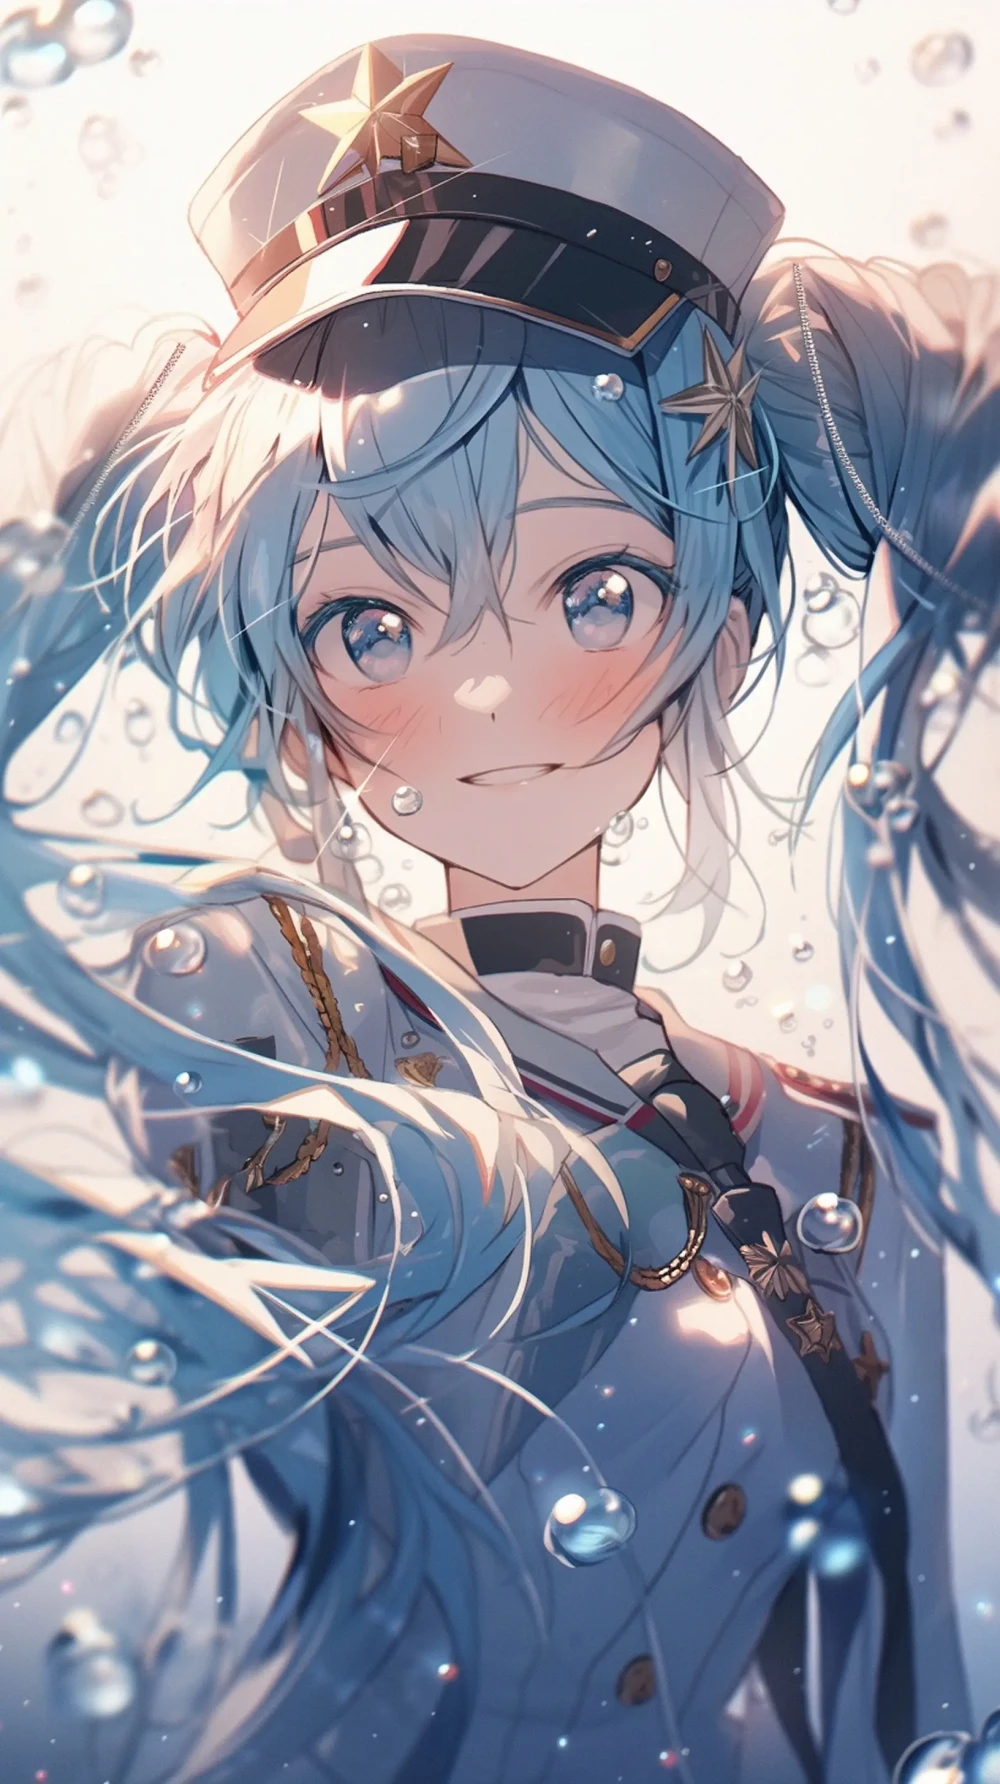 hatsune-miku-anime-style-all-ages-22